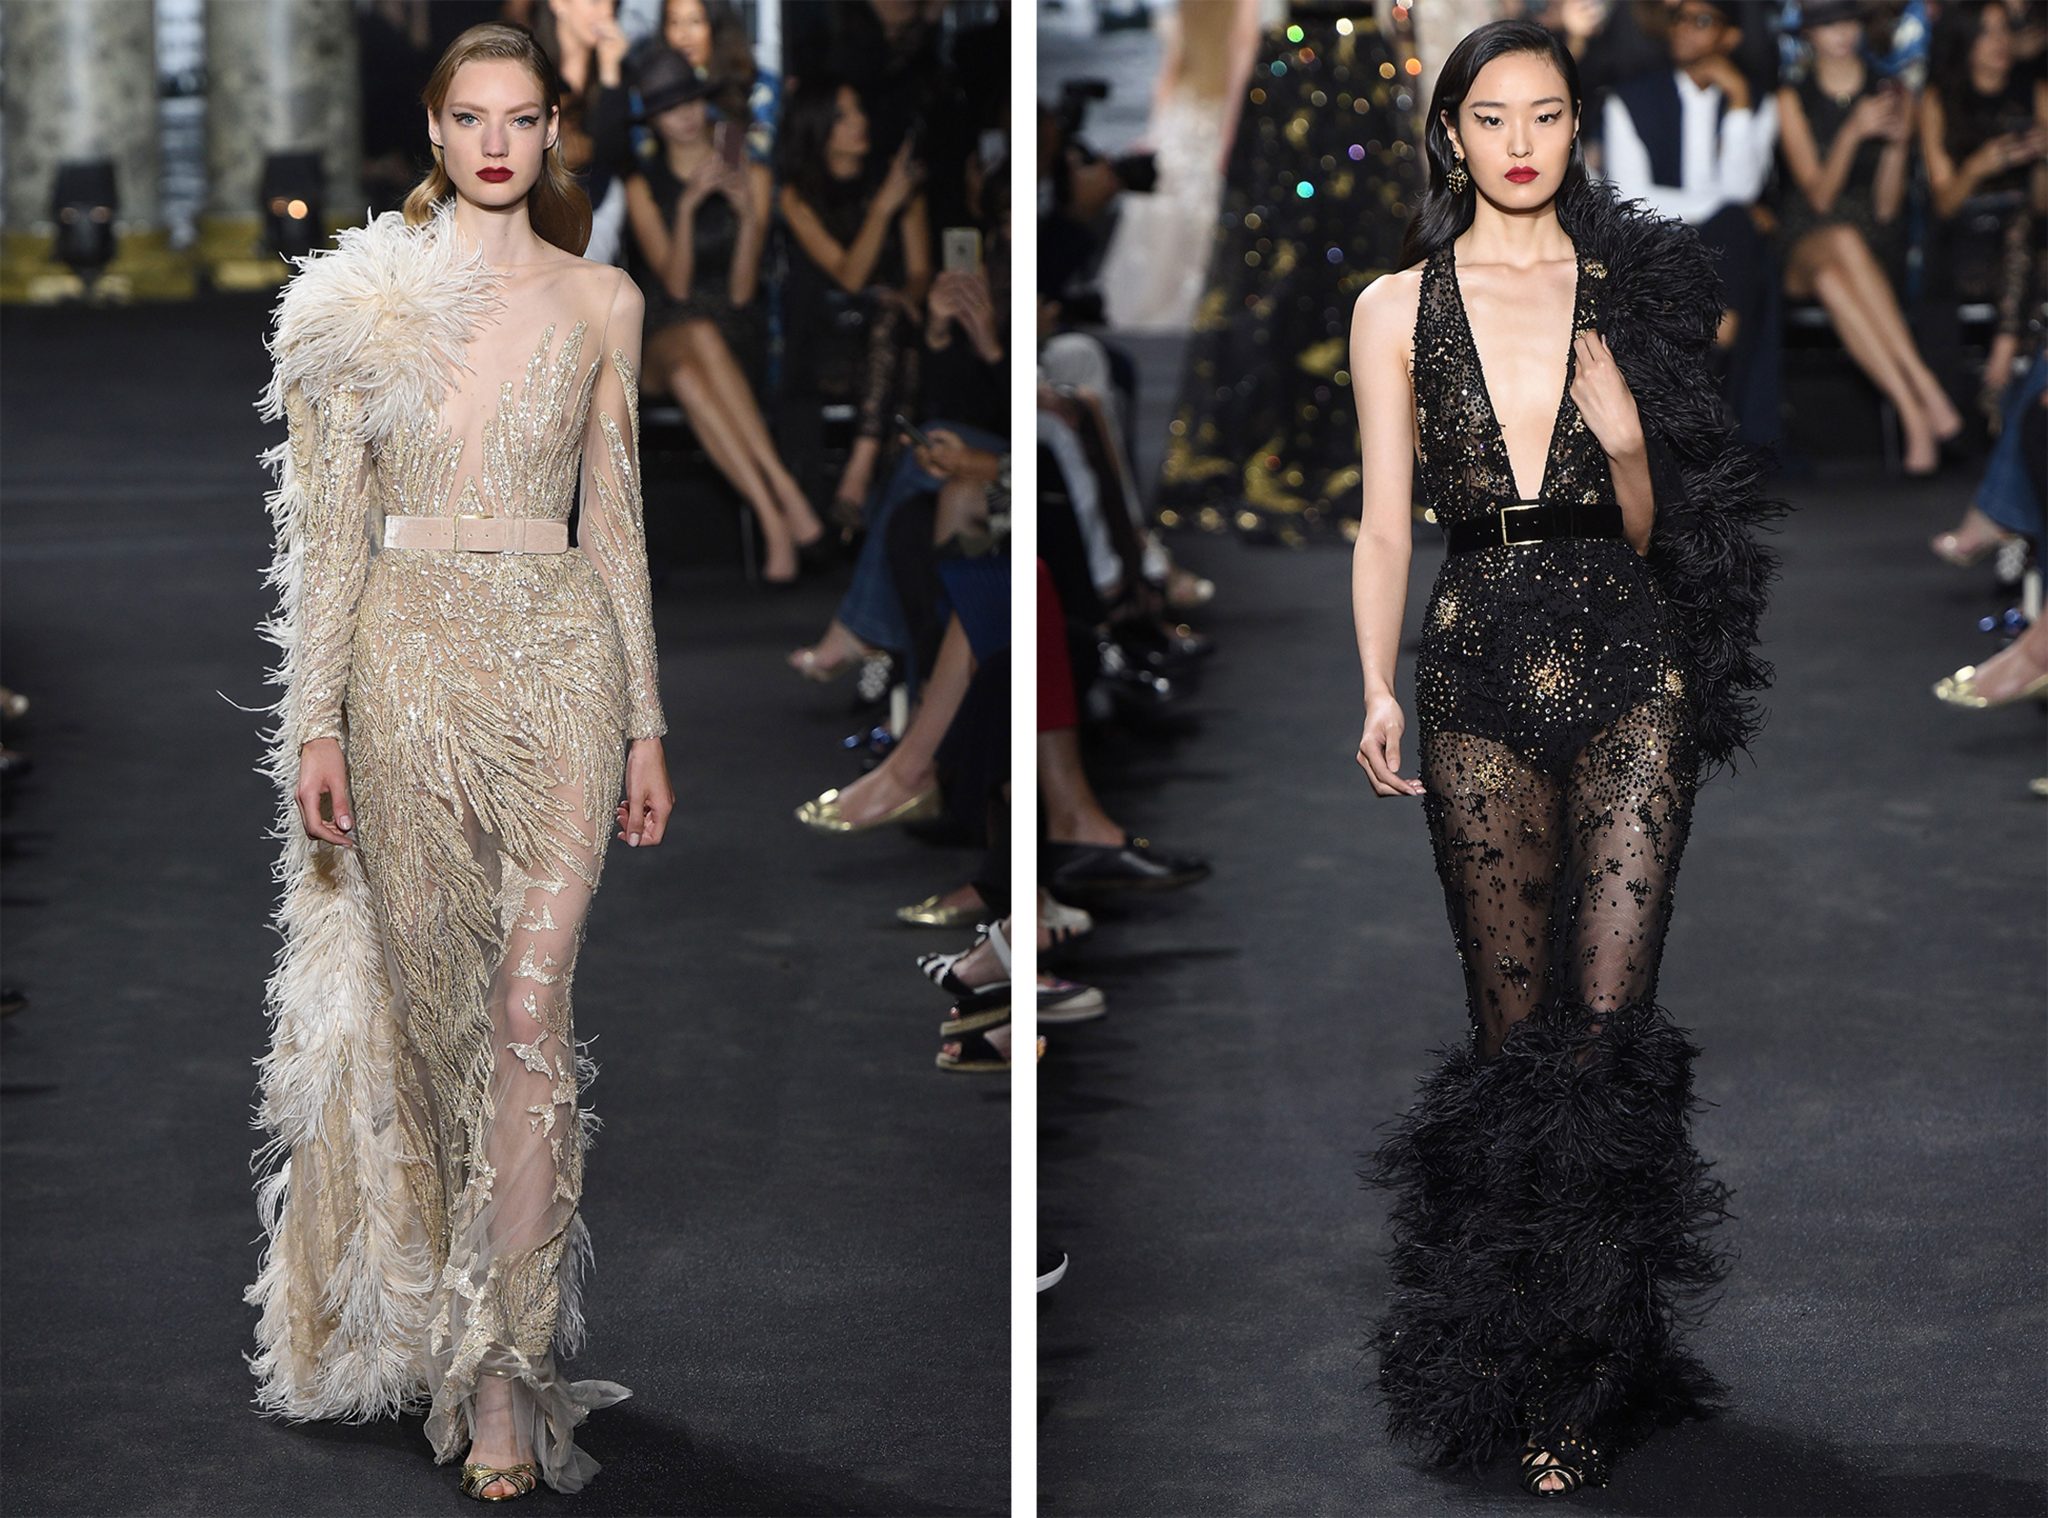 Maida Boina | Elie Saab Couture Fall / Winter 2016 | Susanne Knipper and Yue Han | 6